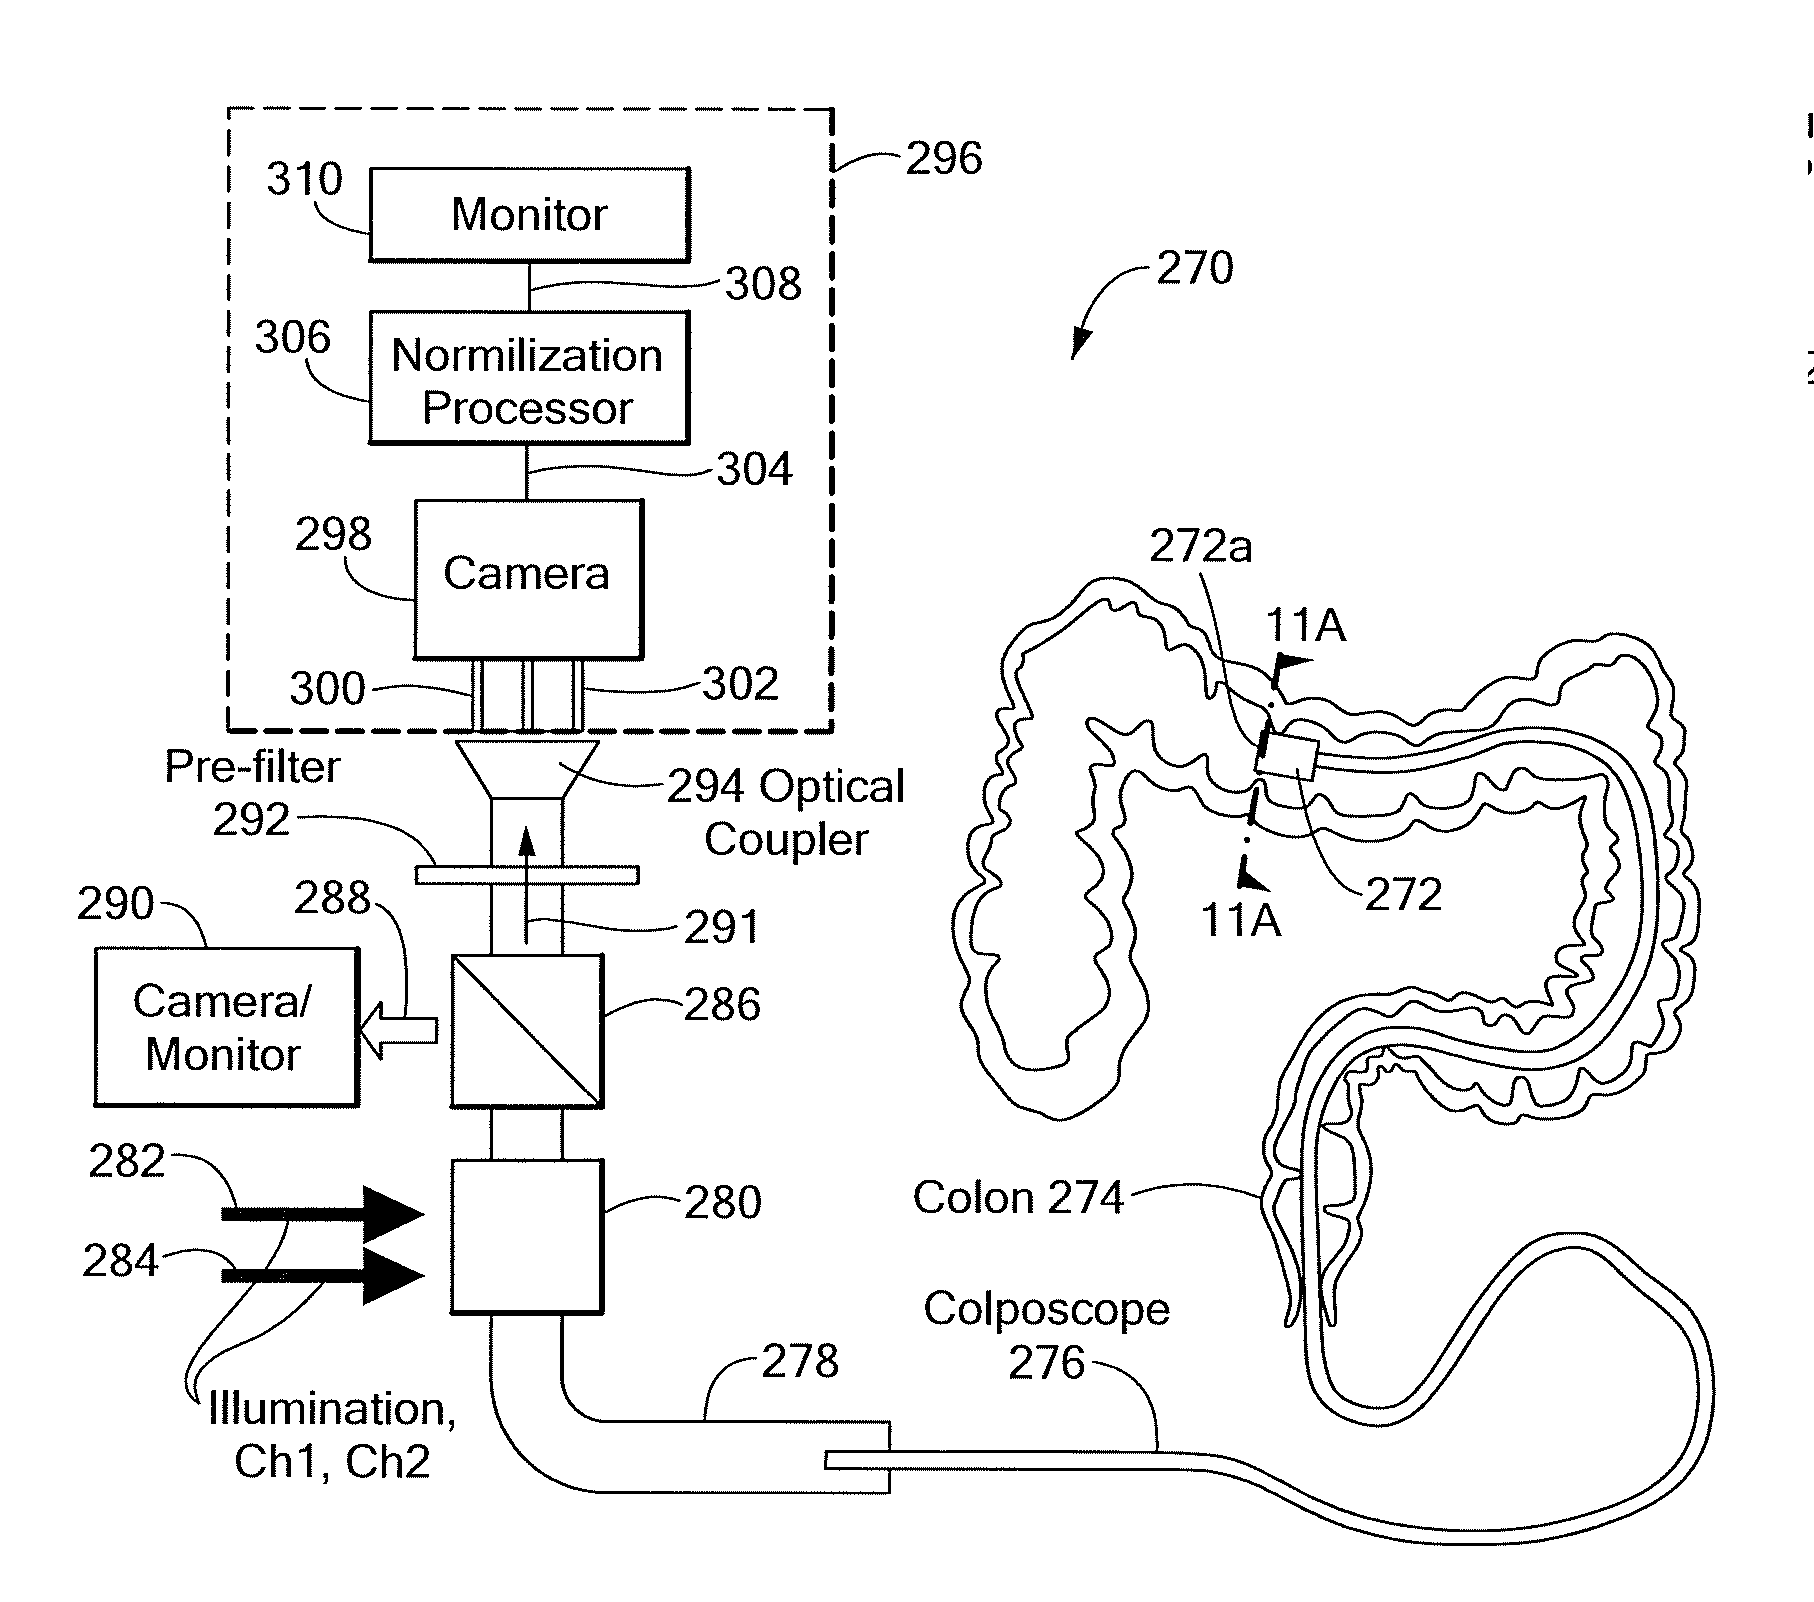 System and Method for Normalized Diffuse Emission Epi-illumination Imaging and Normalized Diffuse Emission Transillumination Imaging